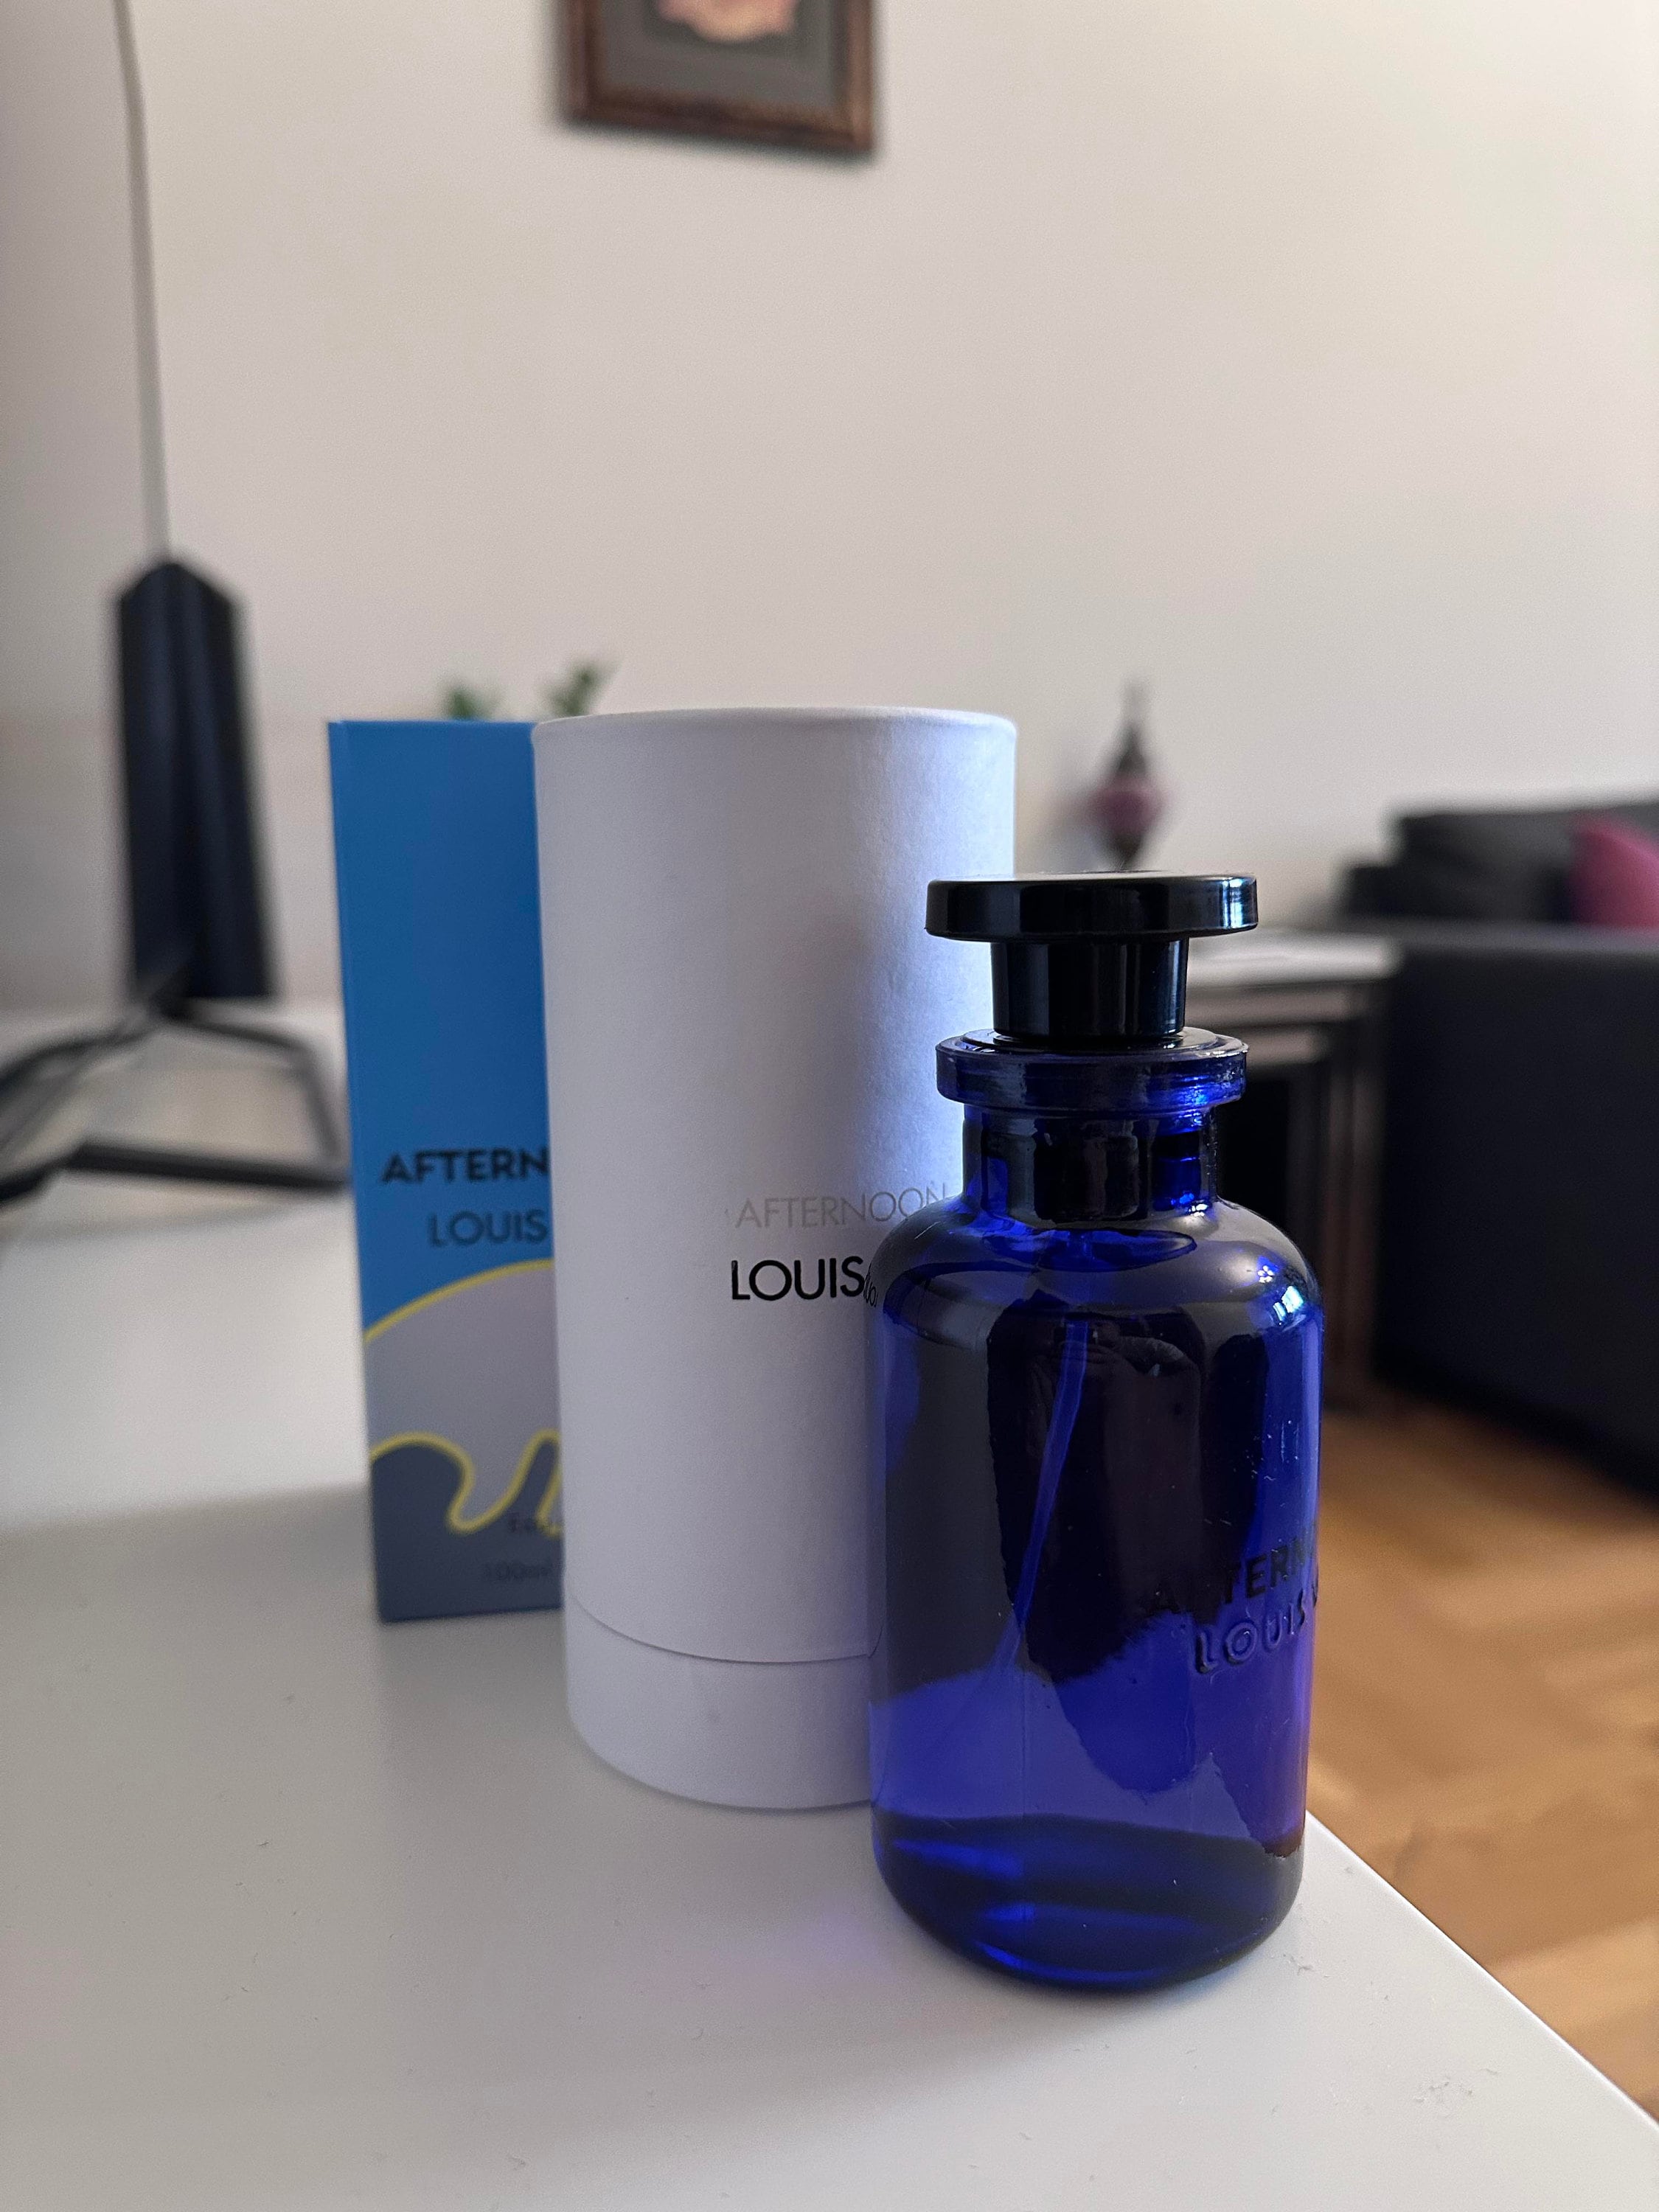 LOUIS VUITTON fragrance in Afternoon Swim